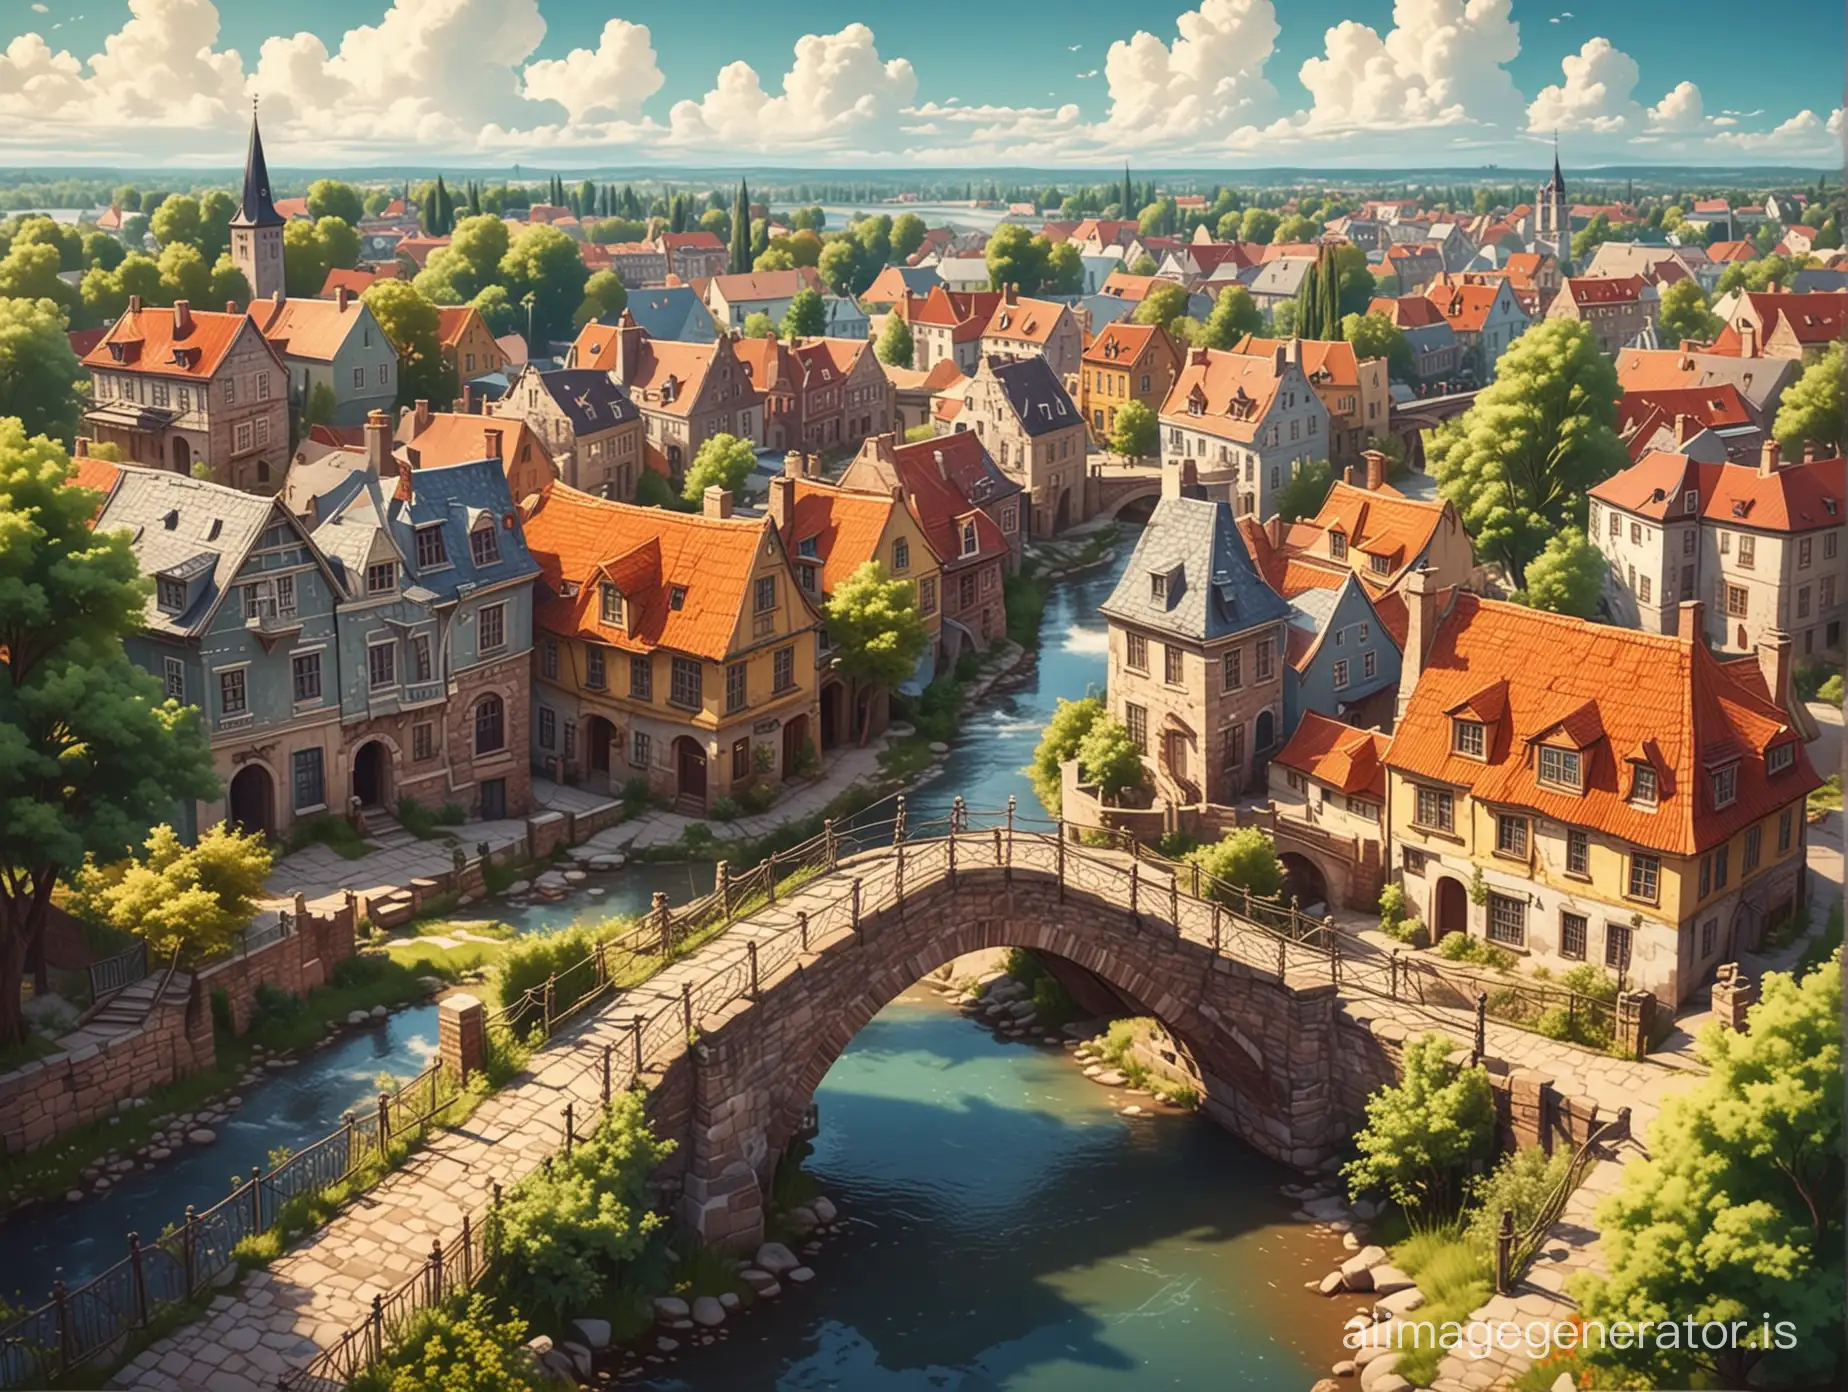 Beautiful old town top view, houses, trees, clouds, bridge over a stream, bright juicy stylized style, cartoon style